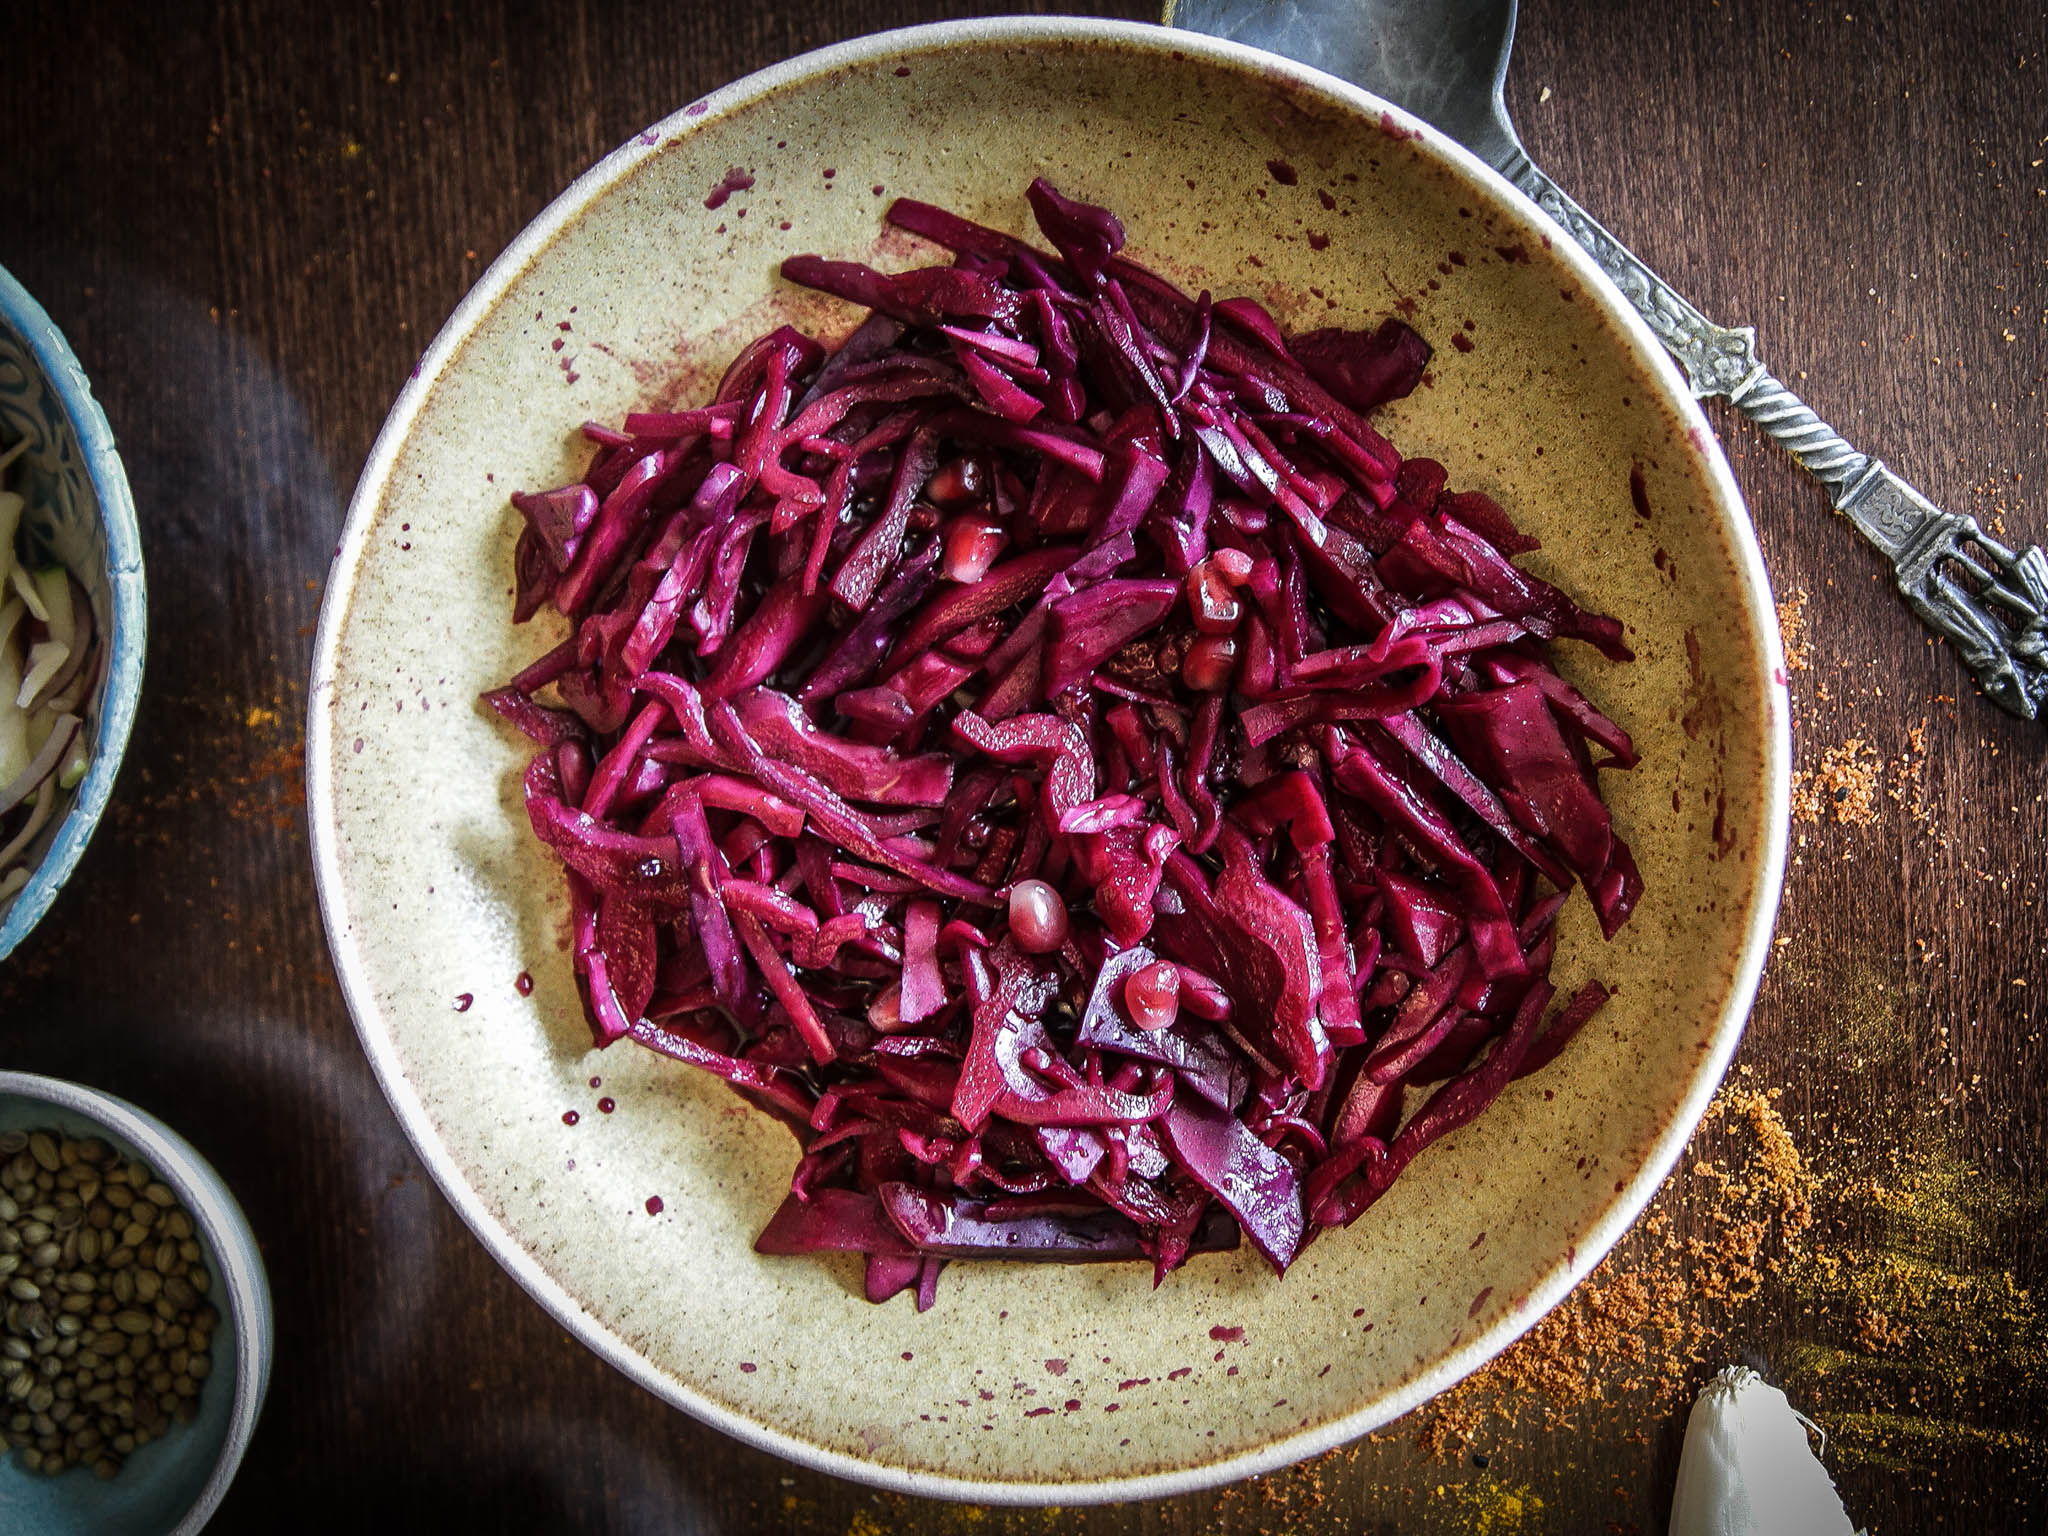 How to make Romy Gill's red cabbage and salad | The Independent | The Independent